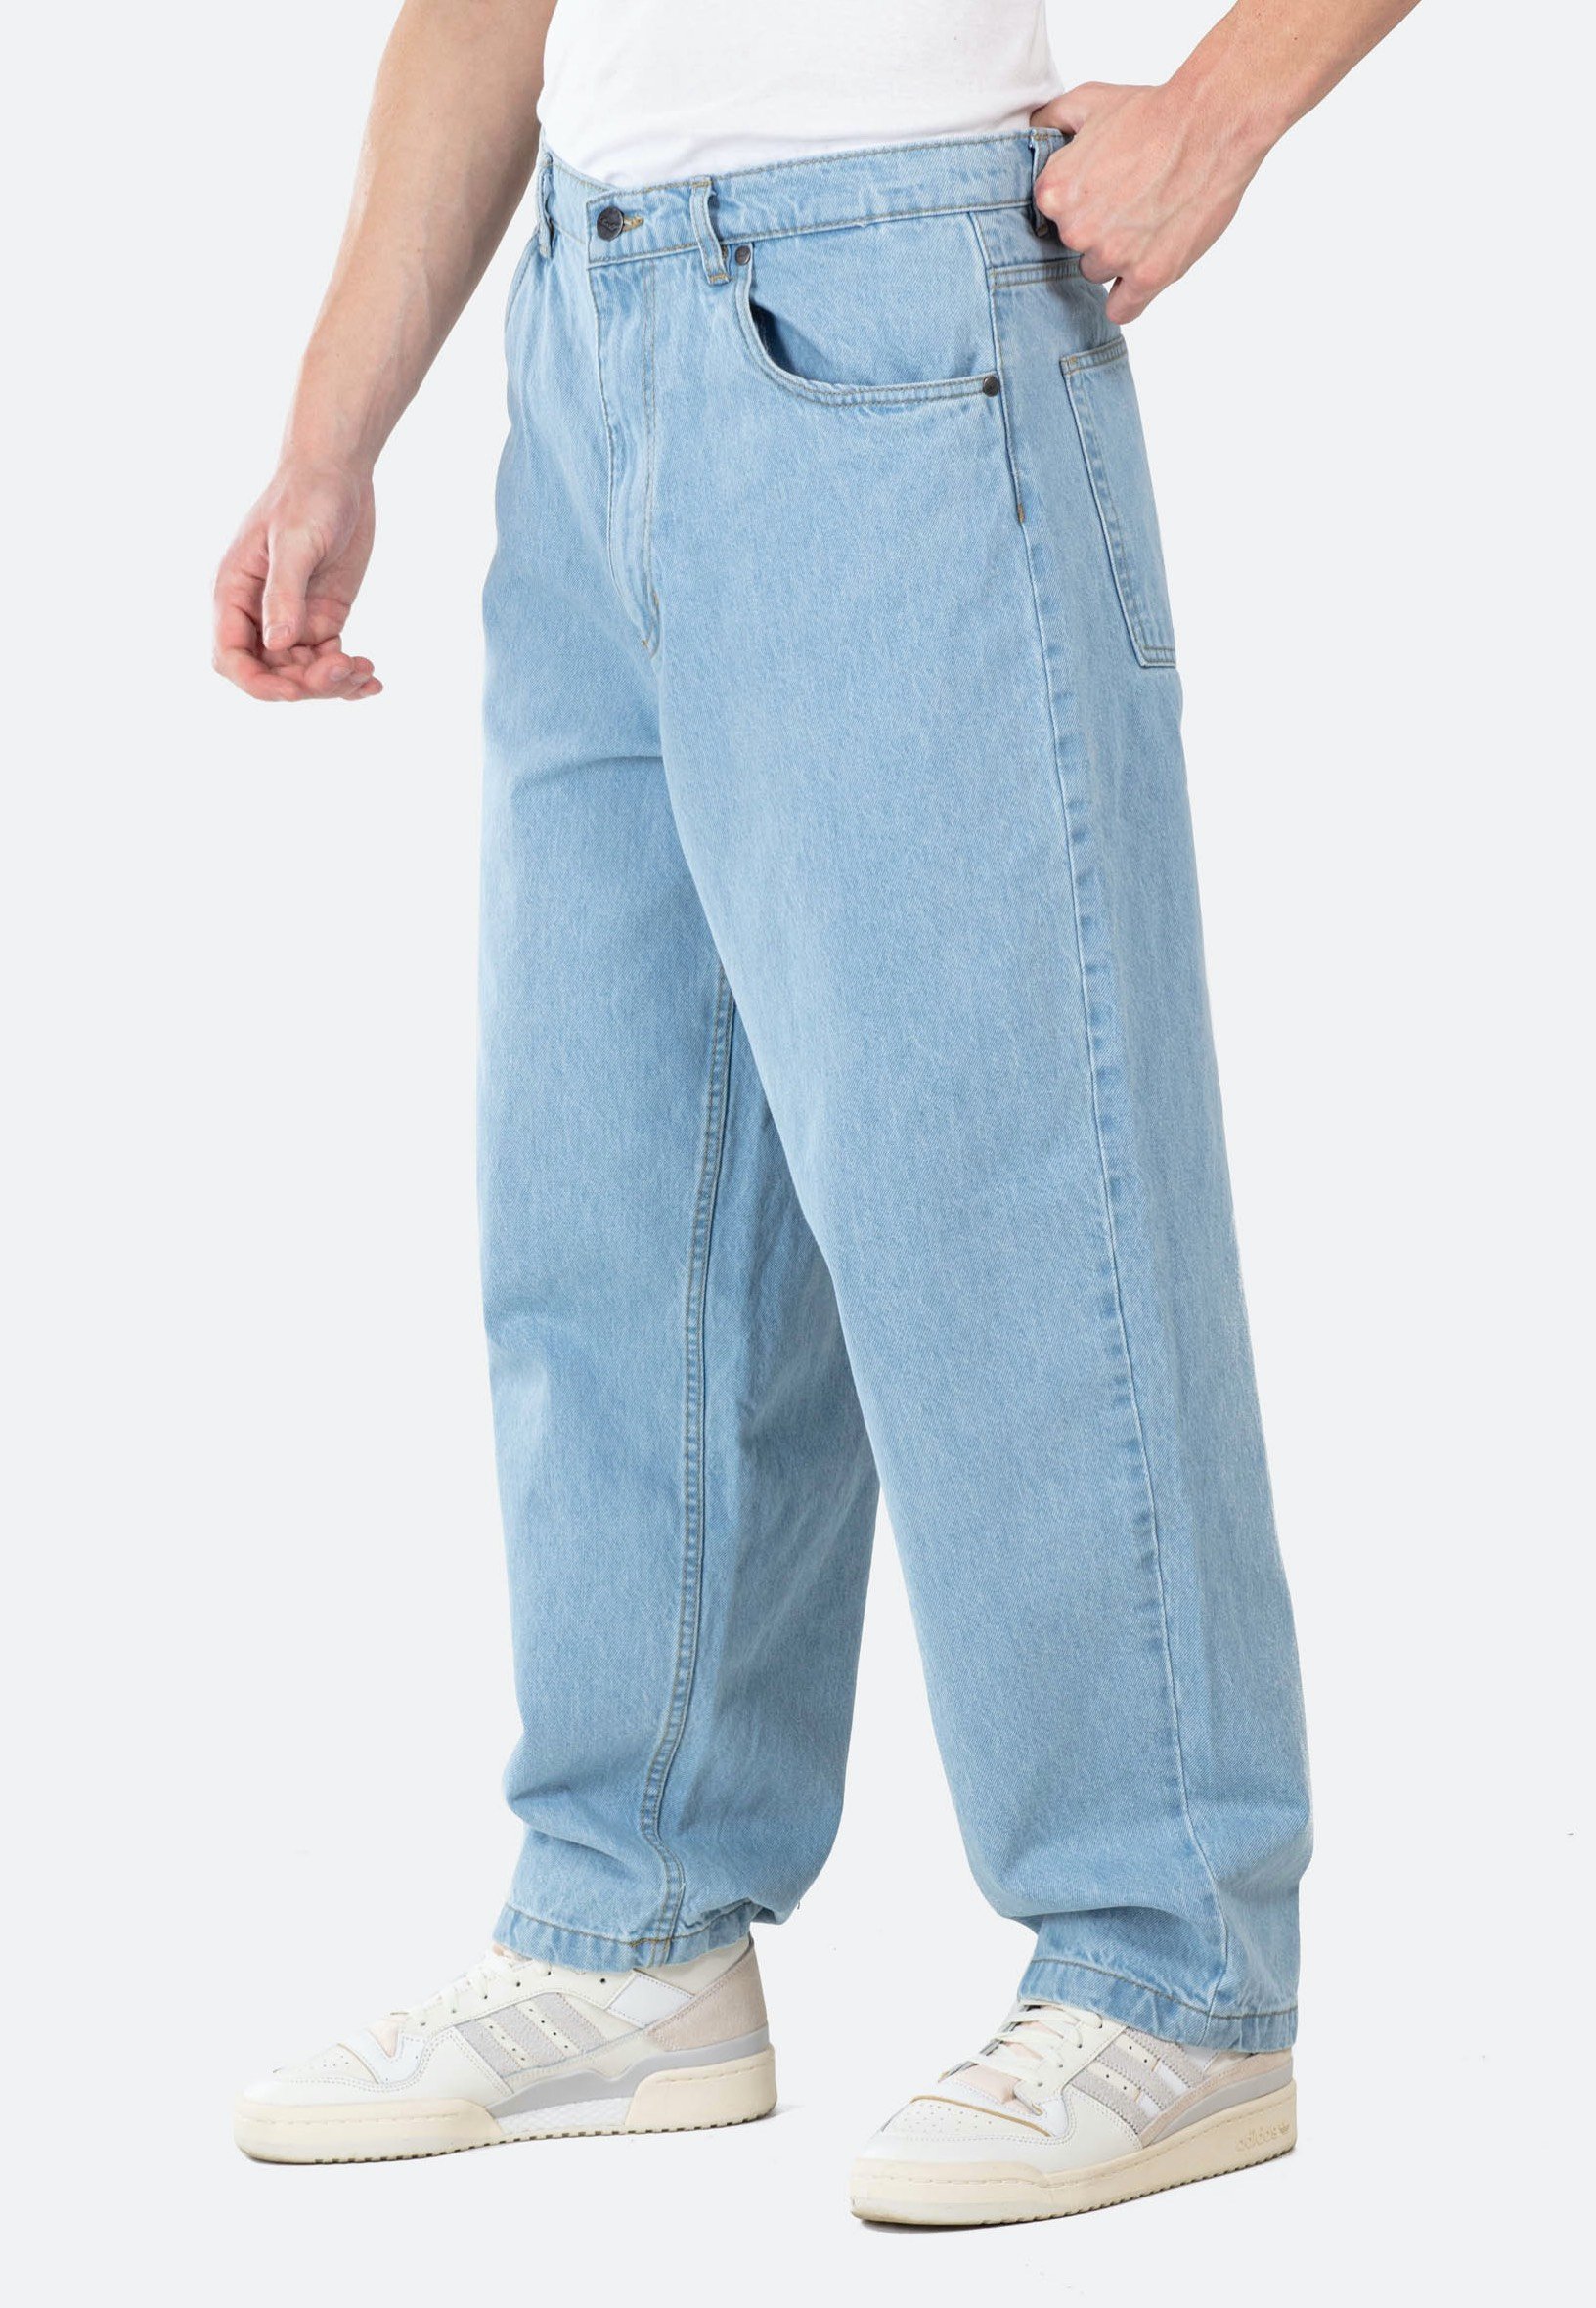 REELL - Baggy Origin Light Blue - Jeans | IMPERICON US